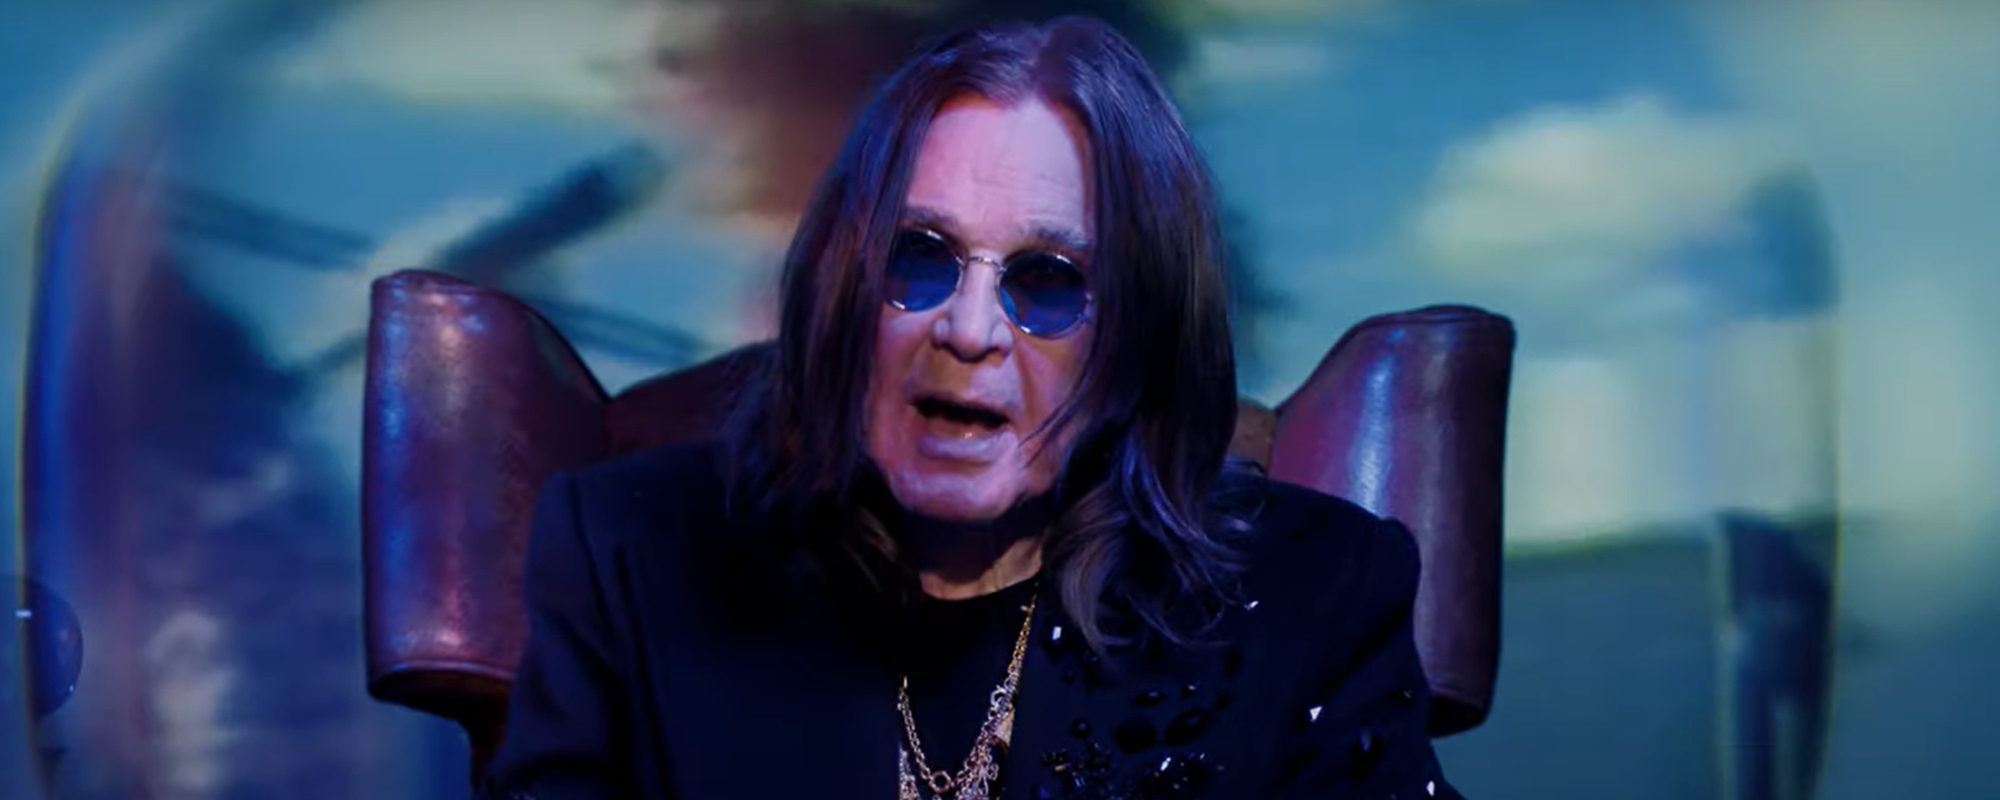 Ozzy Osbourne and Paris Jackson Star in Music Video for Billy Idol Guitarist’s New Song